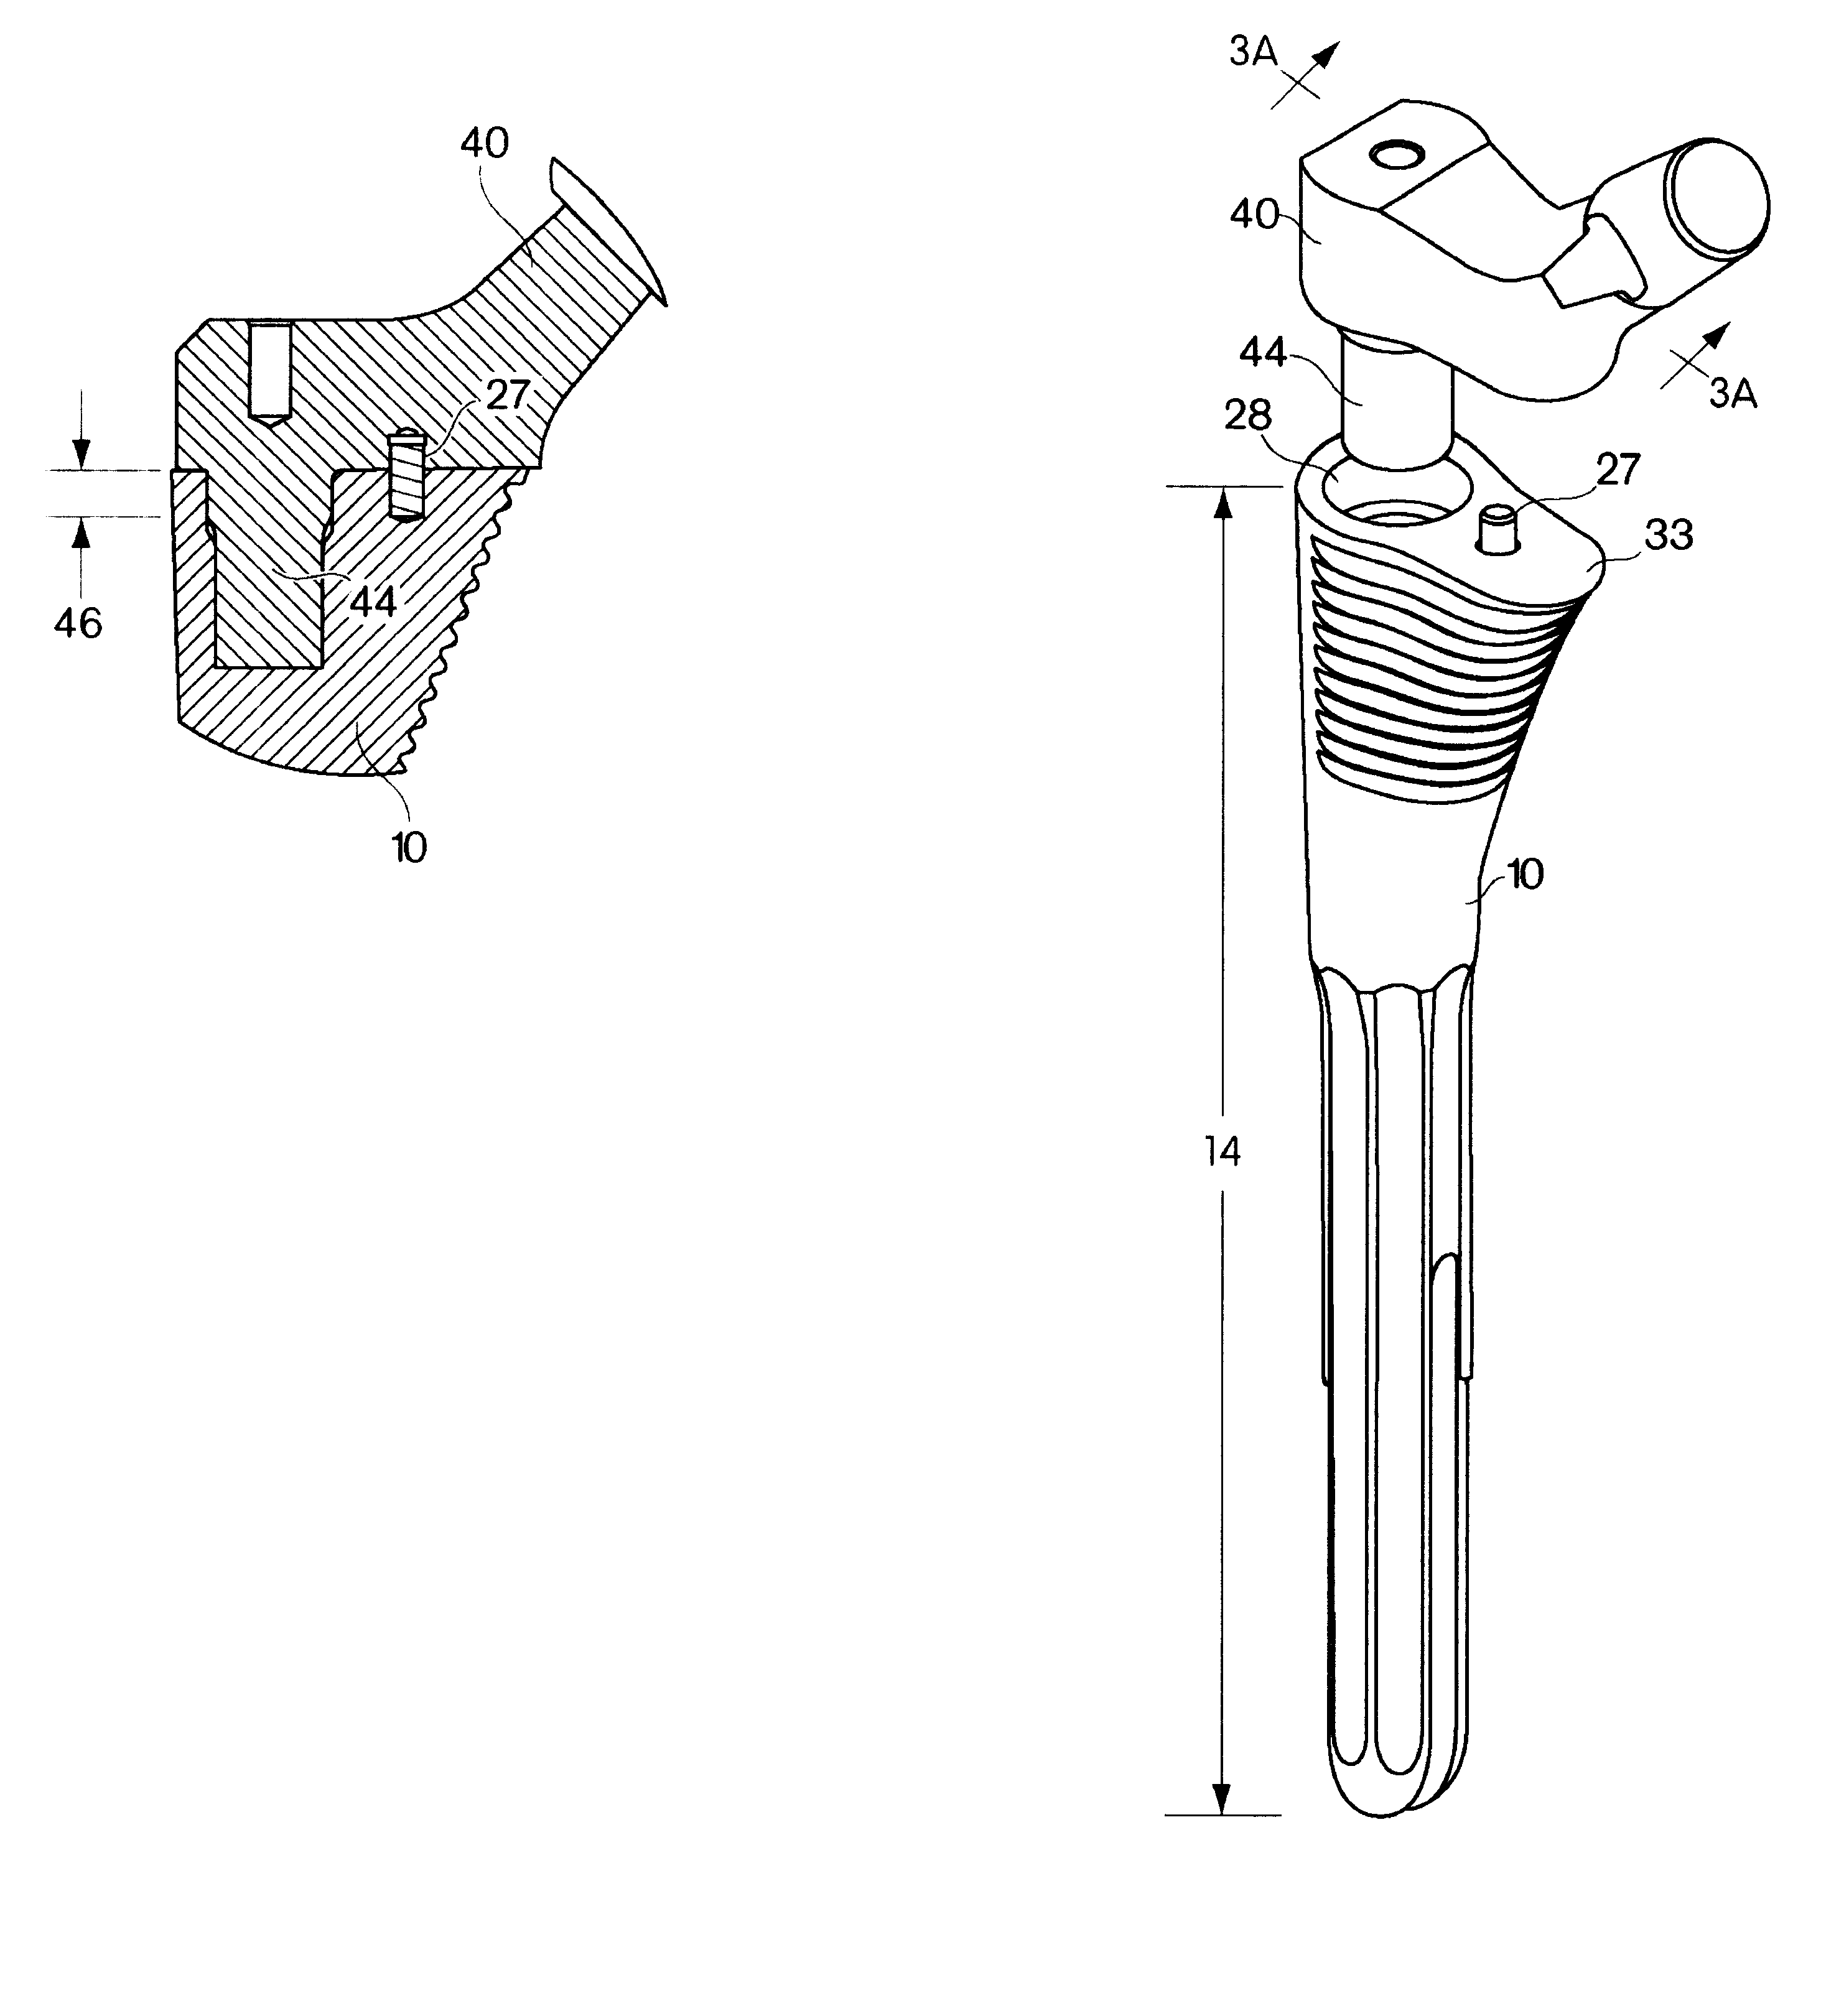 Joint prostheses and components thereof